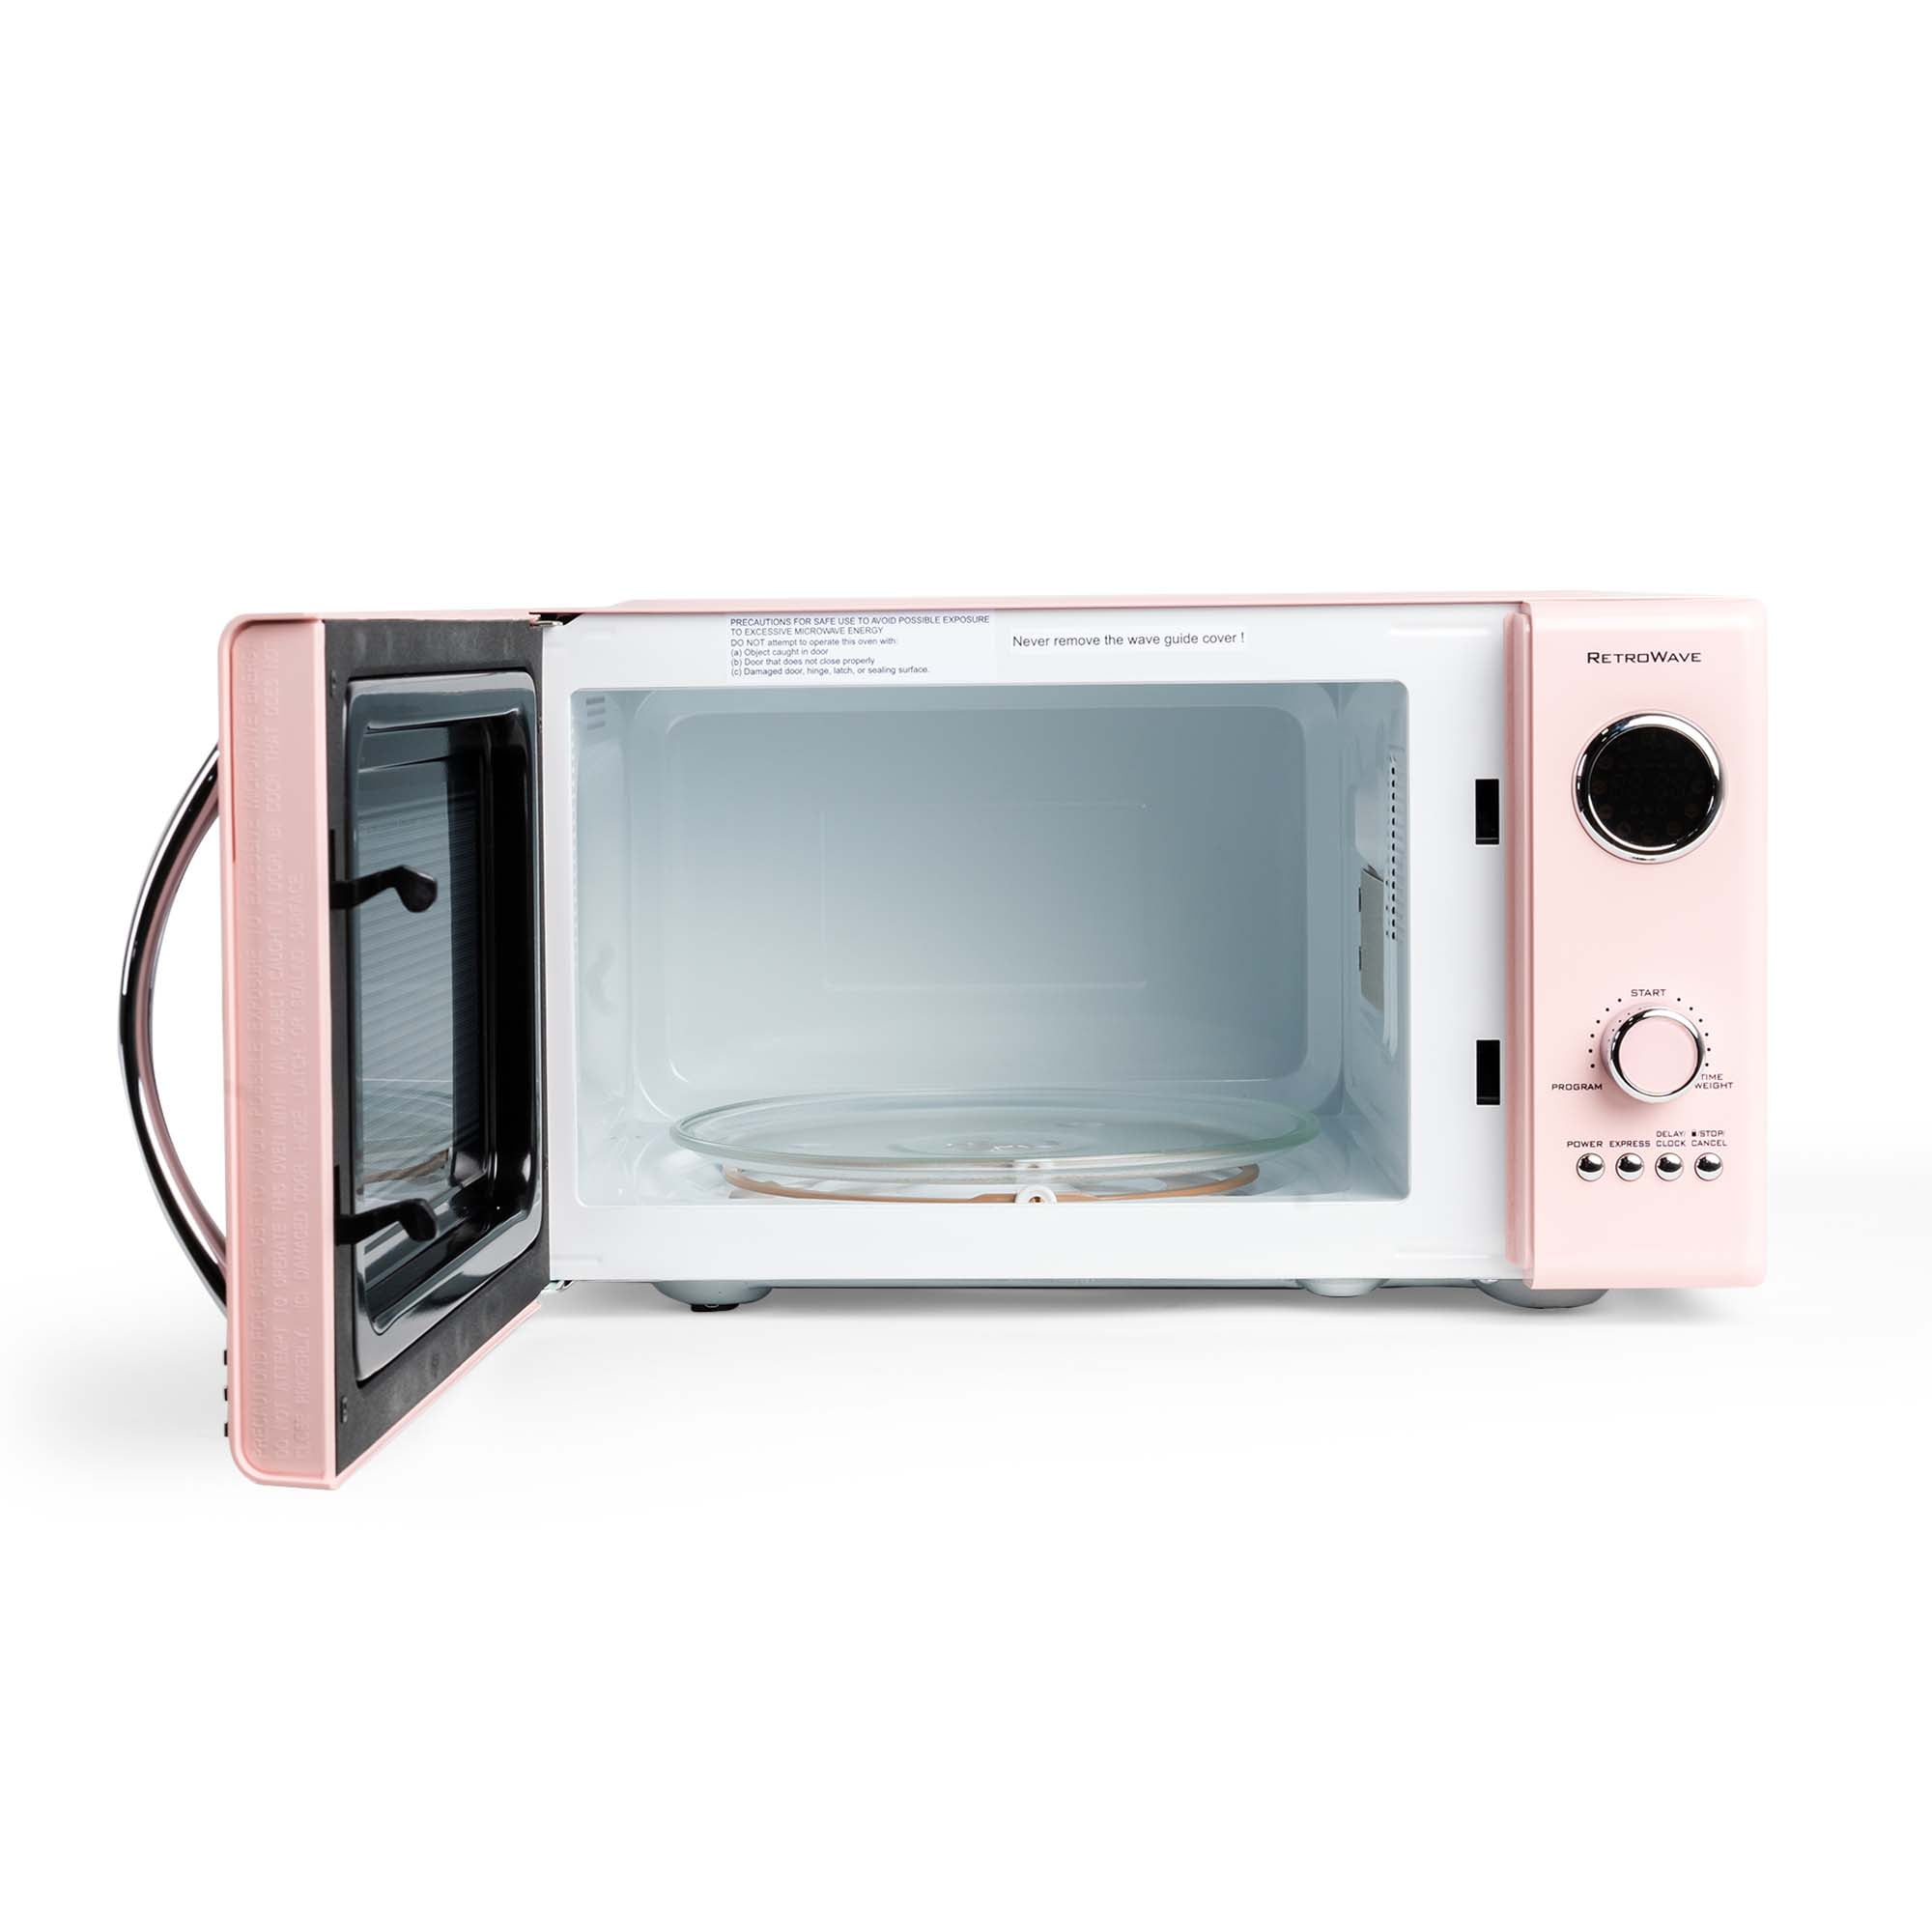 Pink Retro and Chrome Microwave, Pink Retro Microwave, Pink Kitchenaid,  Pink Appliances, Pink Shabby Chic, Pink Retro Kitchen Appliances 